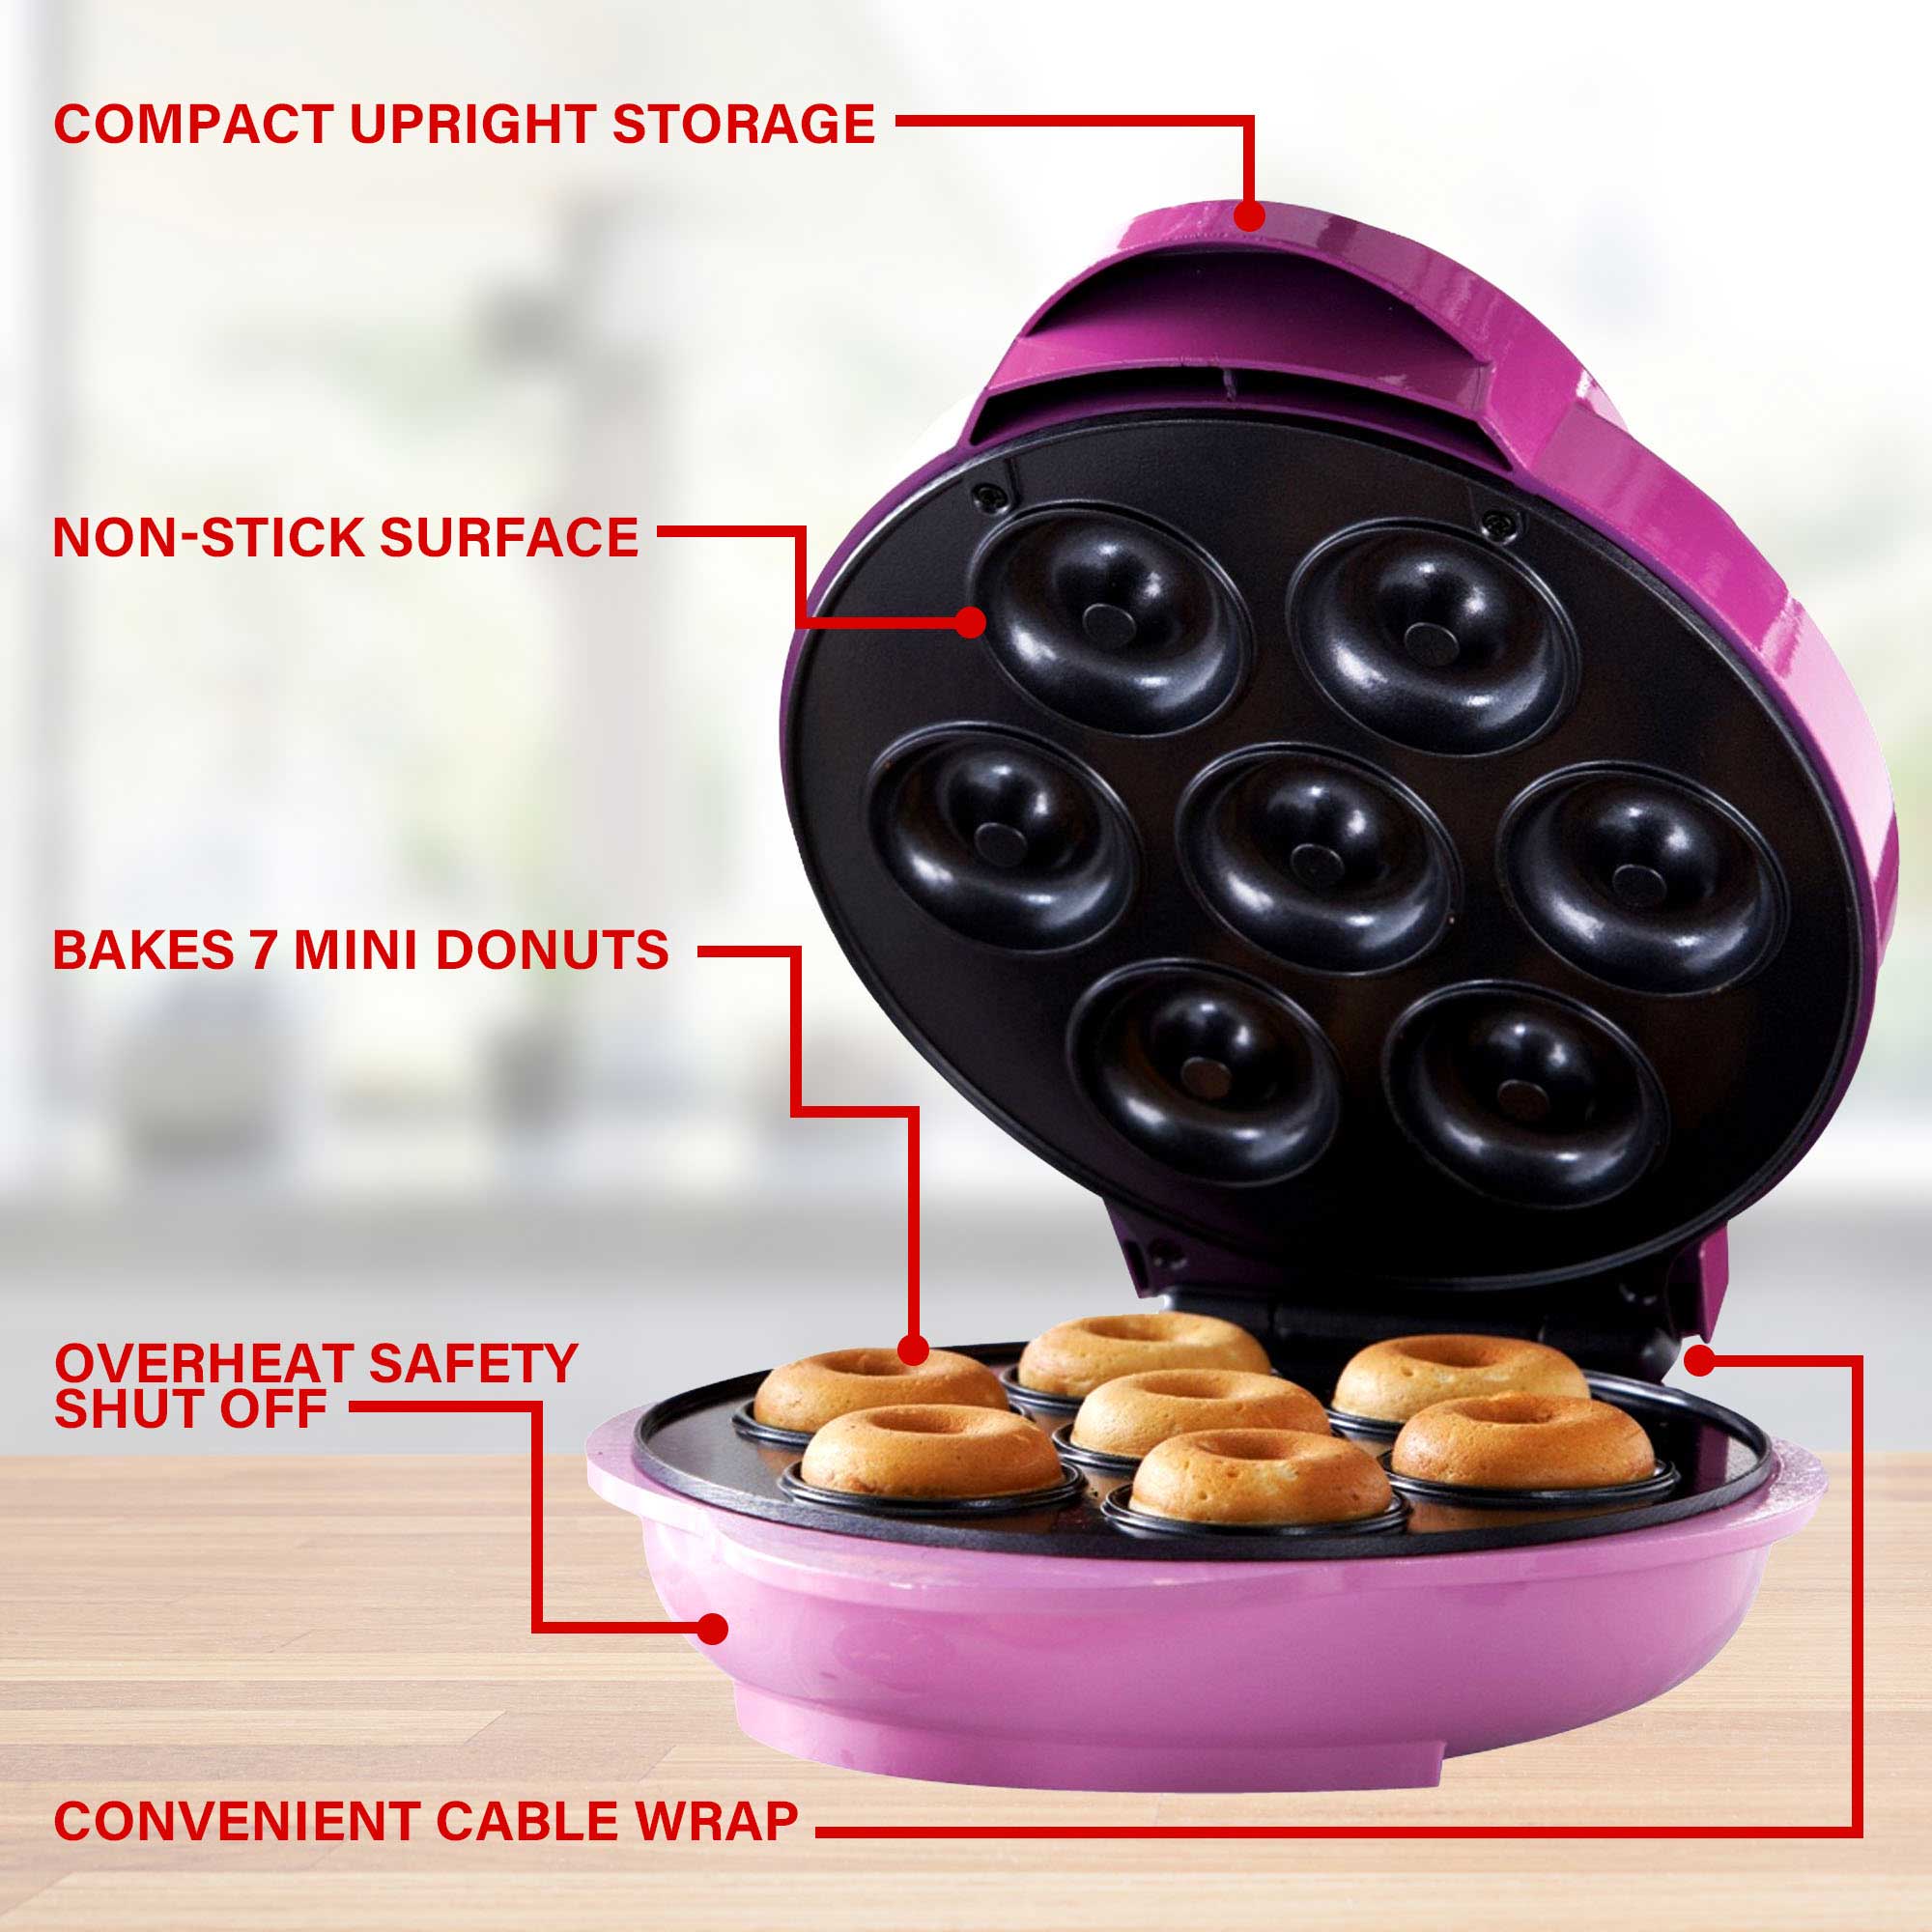 Donut plate for sandwich and waffle maker SNACK COLLECTION